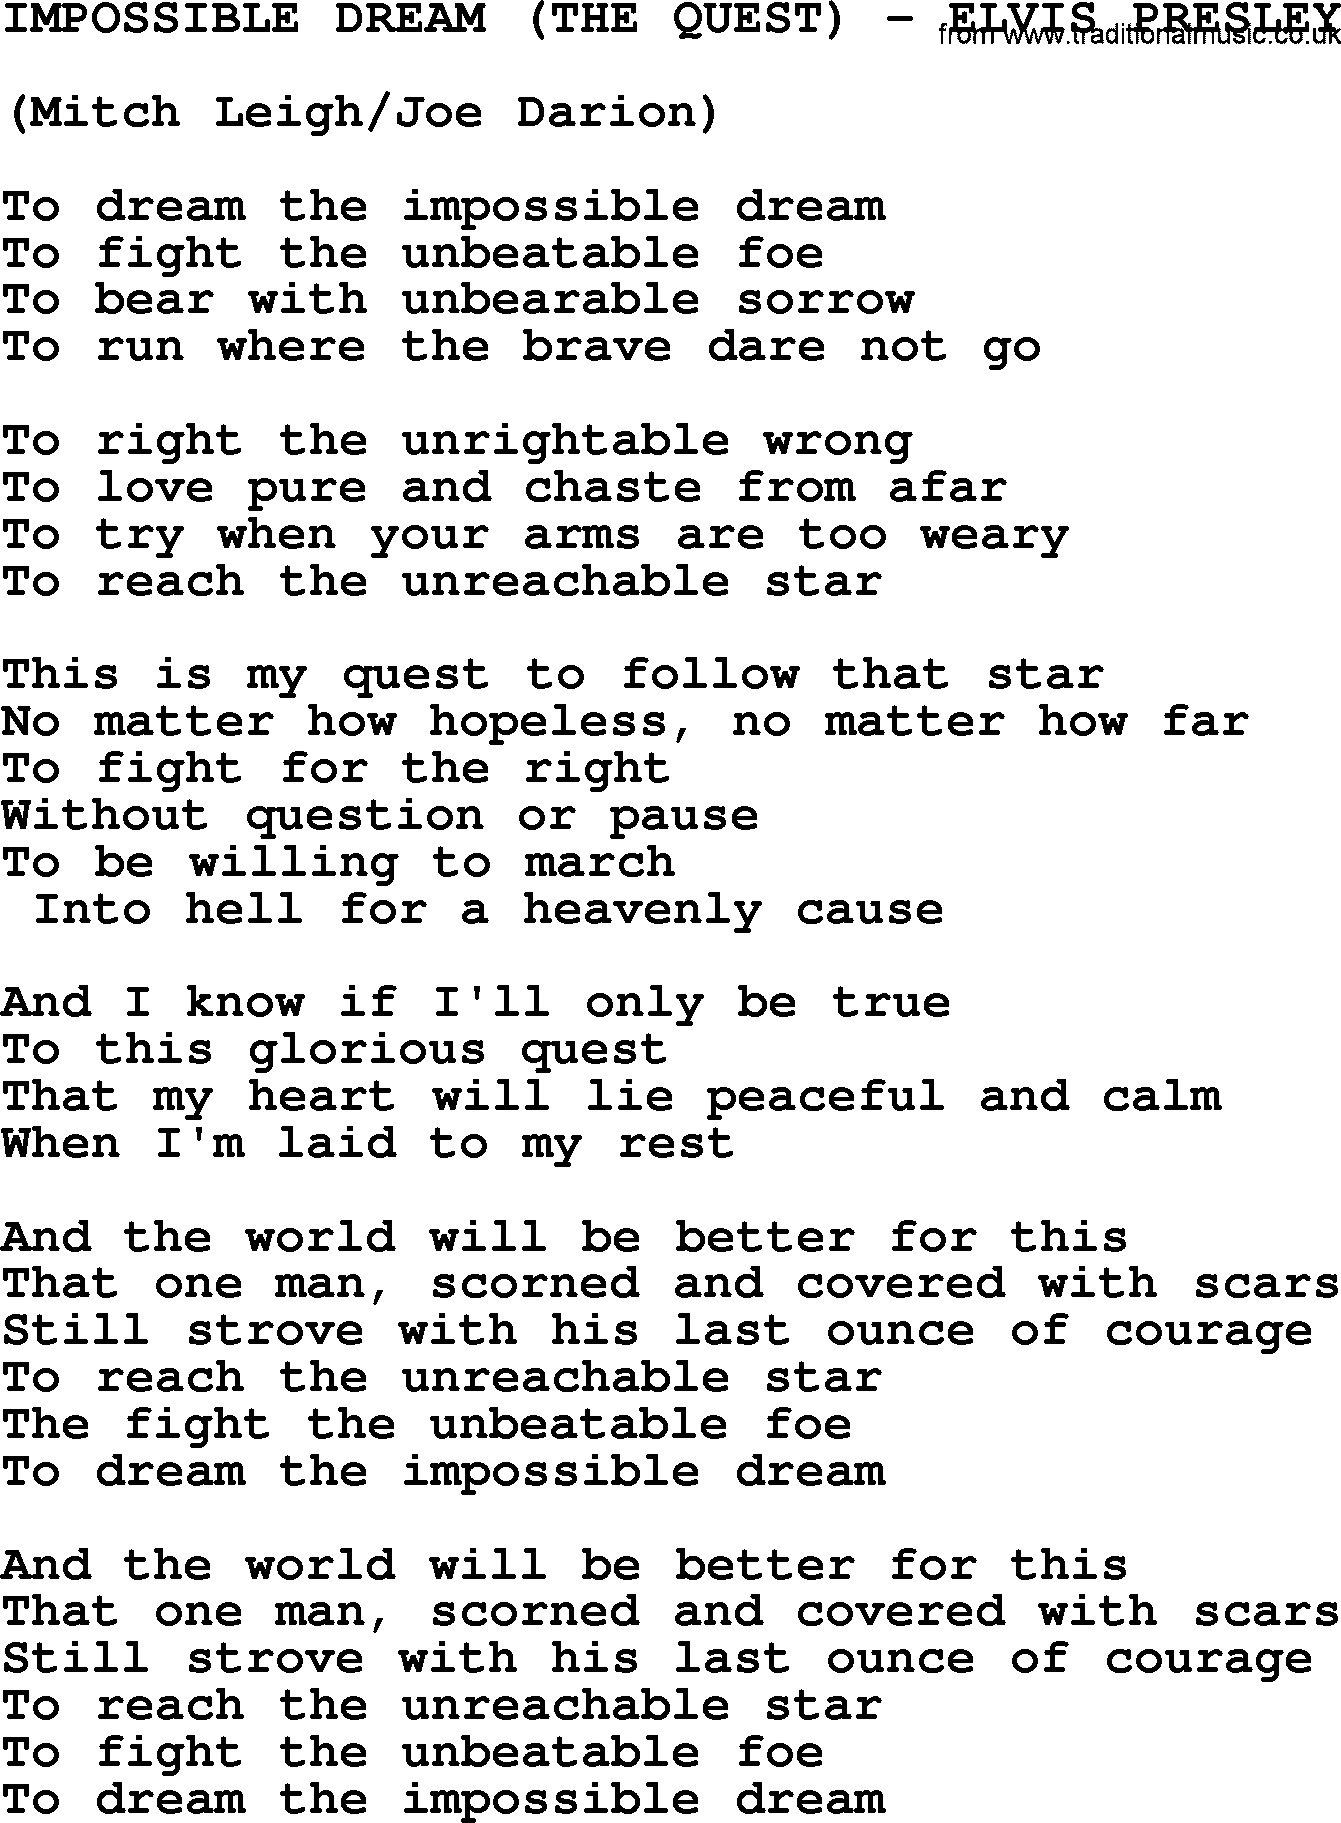 Elvis Presley song: Impossible Dream (The Quest)-Elvis Presley-.txt lyrics and chords